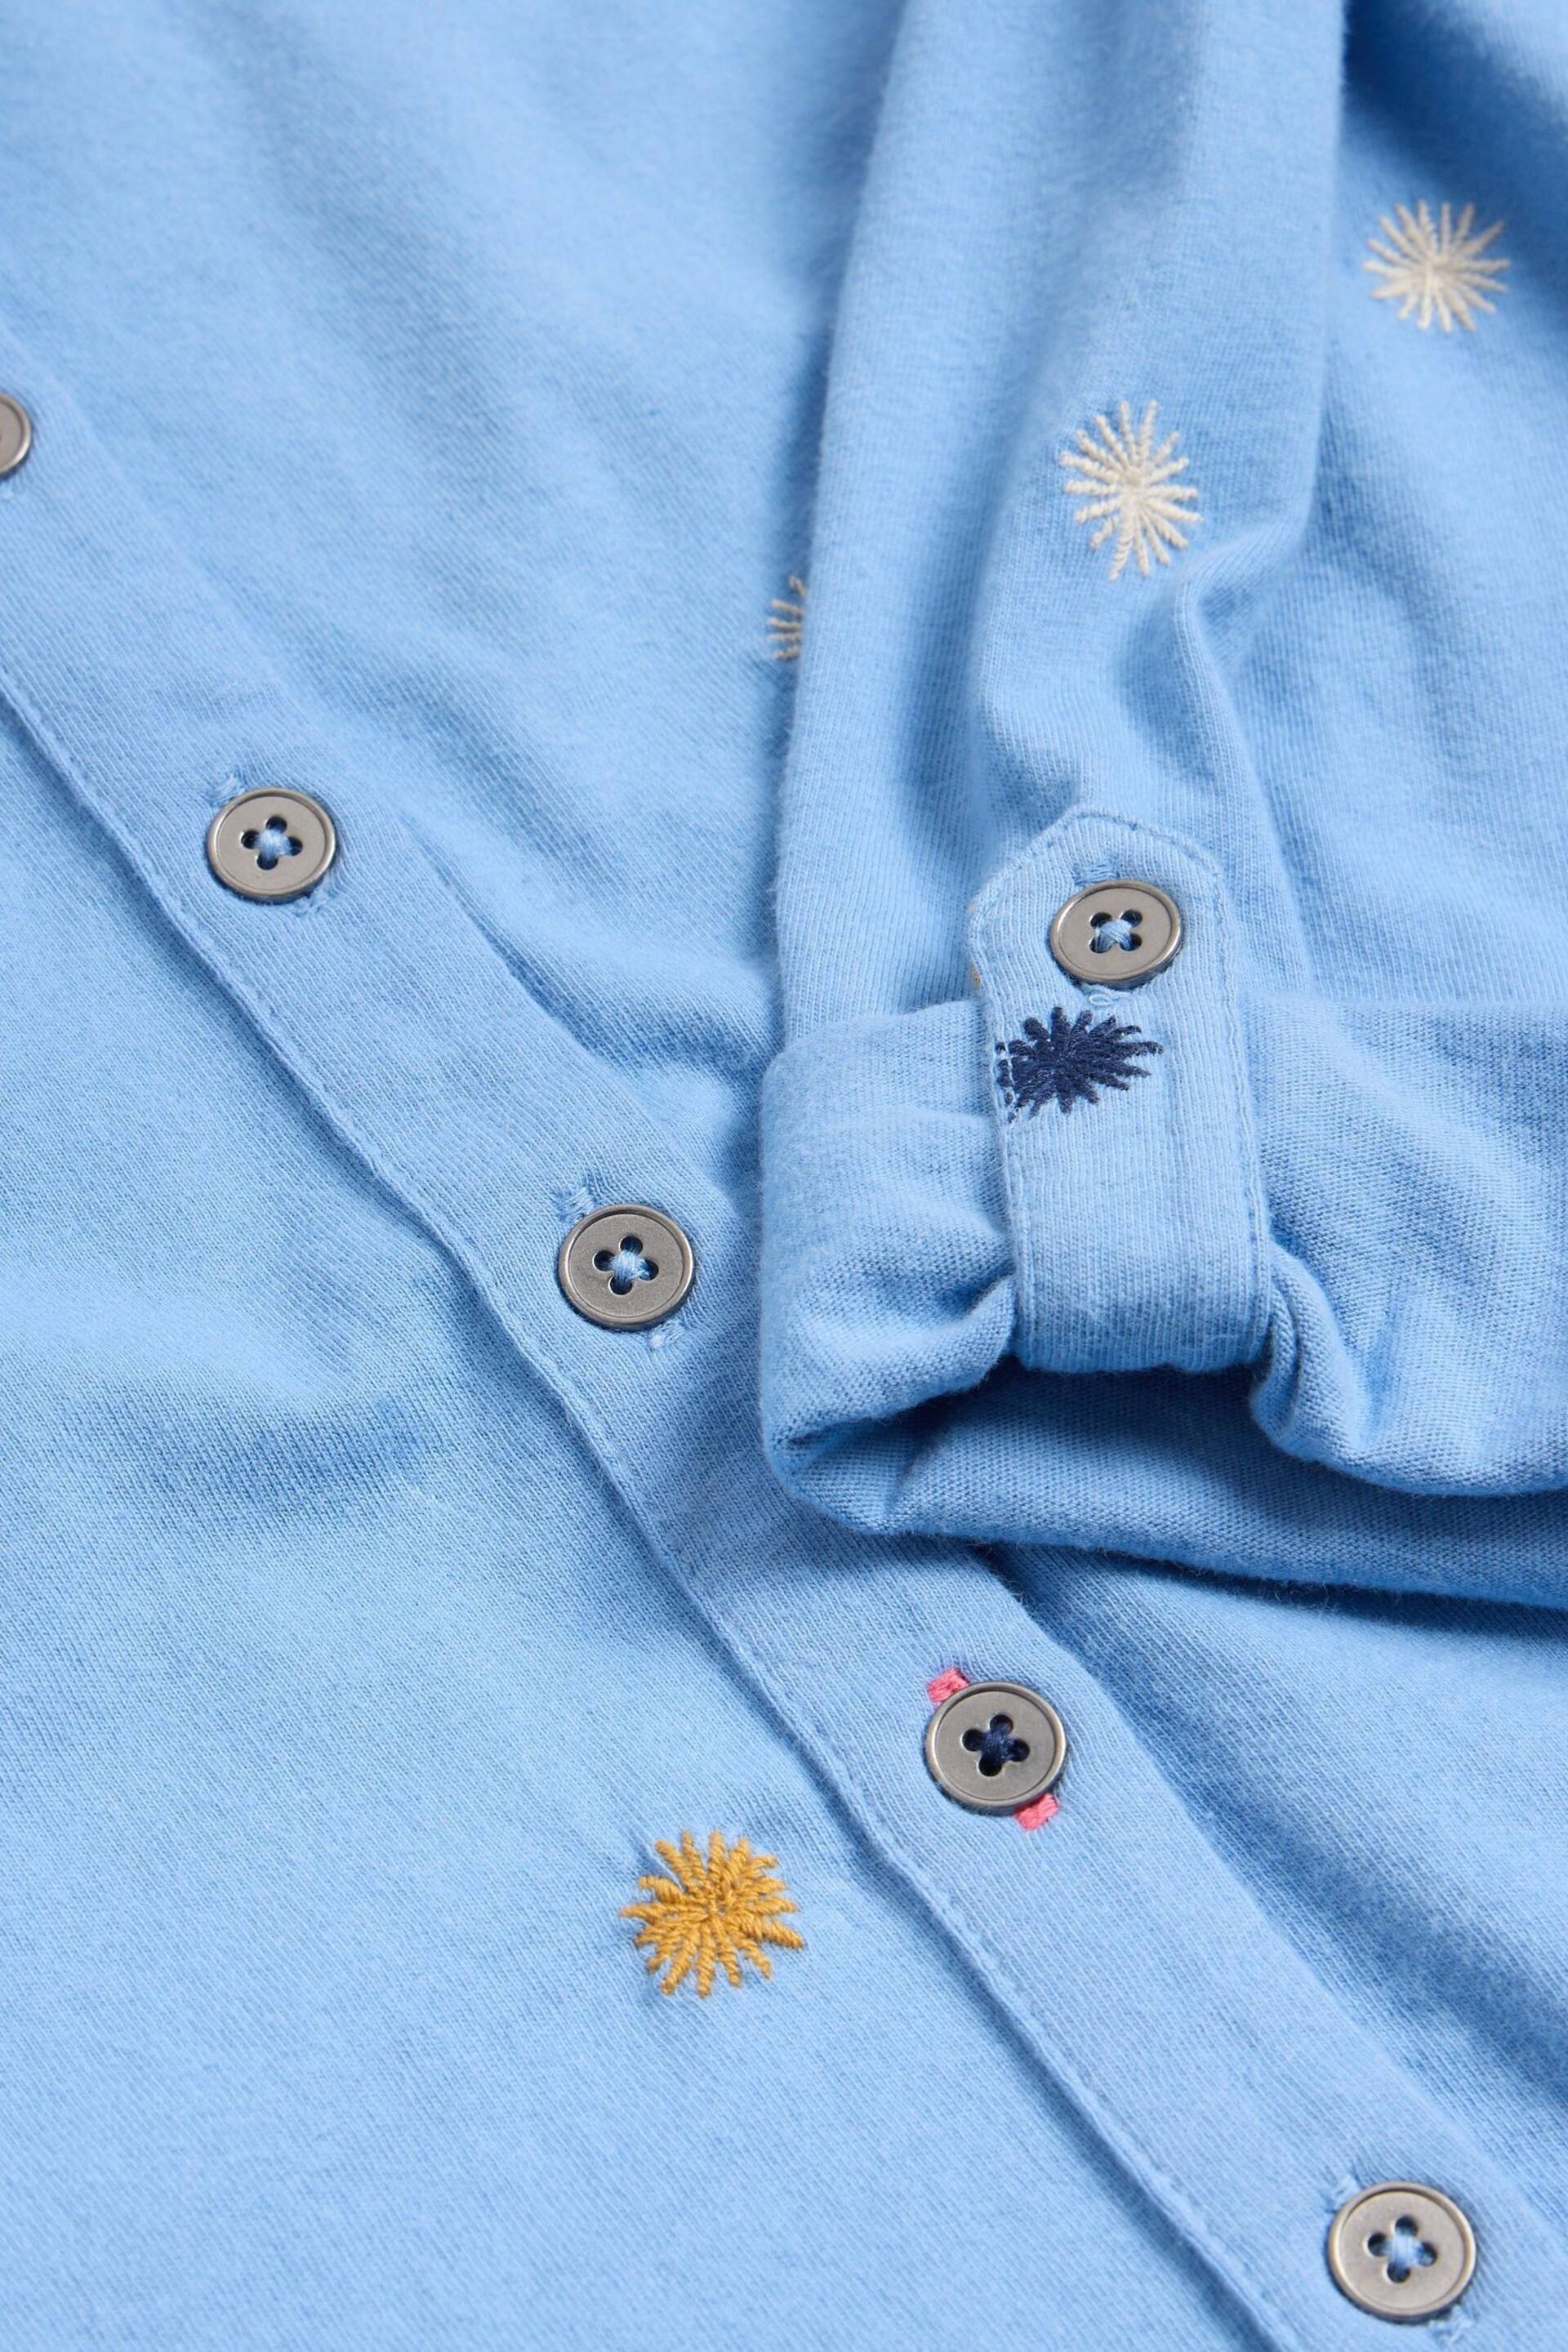 White Stuff Blue Annie Embroidered Jersey Shirt - Image 7 of 7